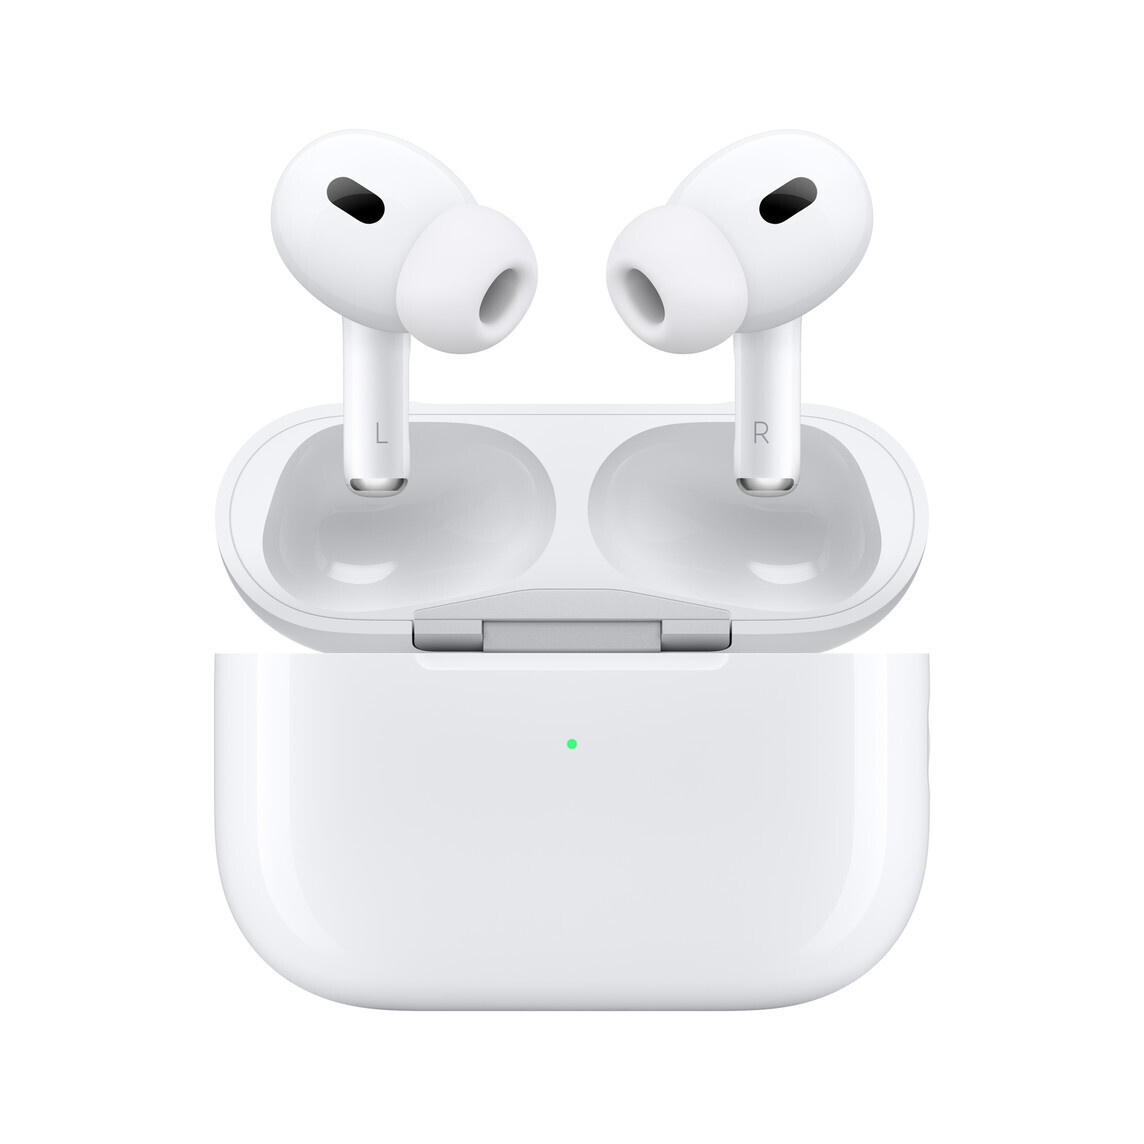 New Apple AirPods Pro (2nd Generation )